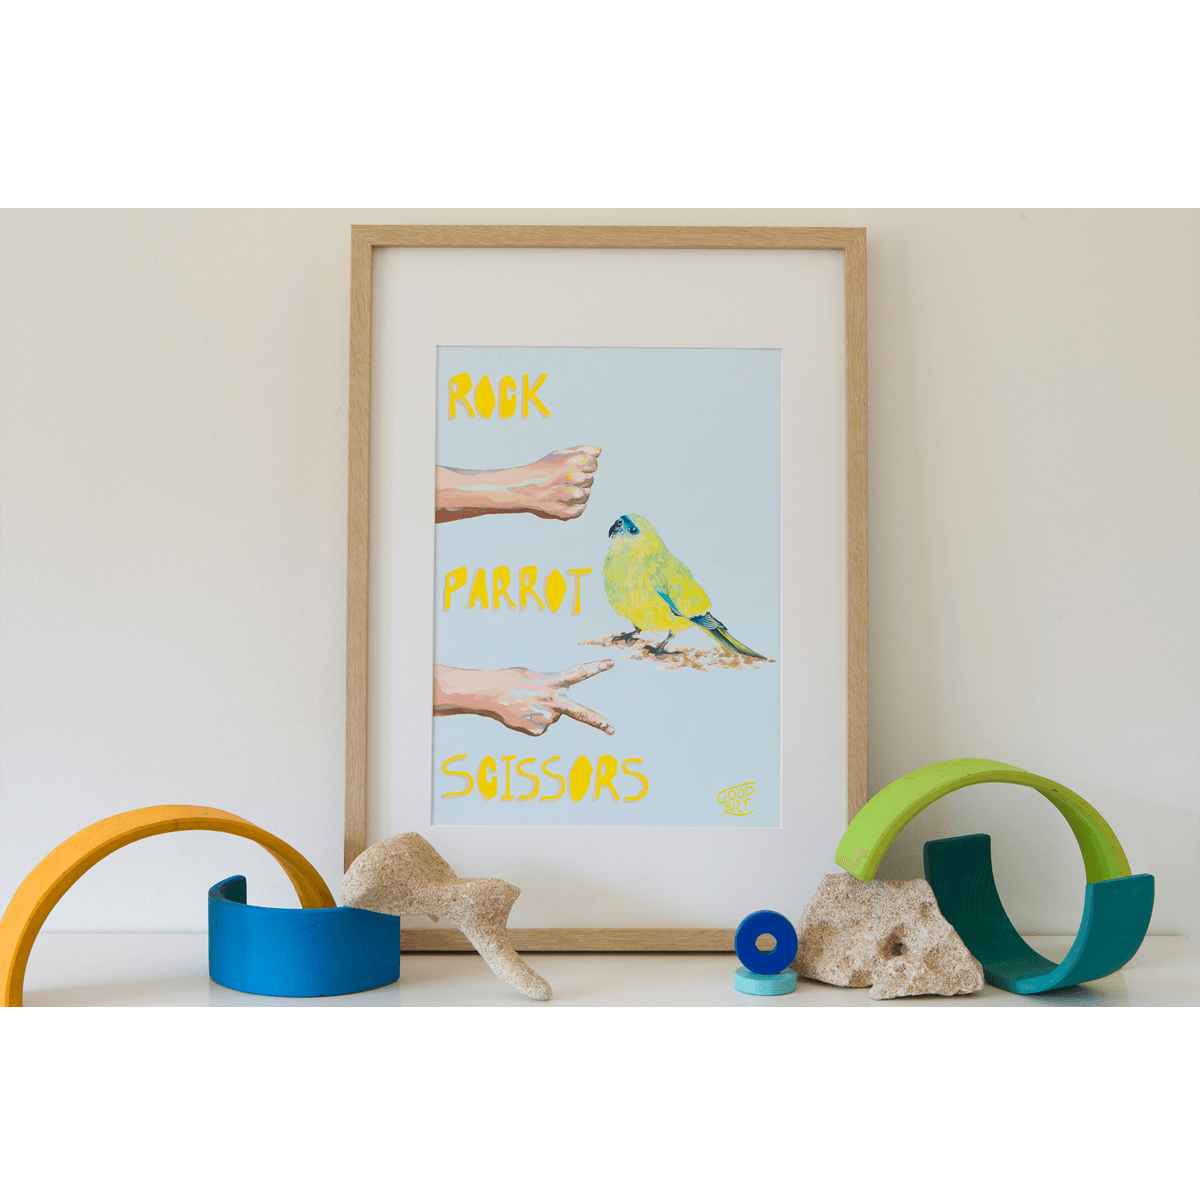 A colourful artwork of the Rottnest Rock Parrot playing a game of rock paper scissors against a pair of hands. Framed original artwork on shelf.